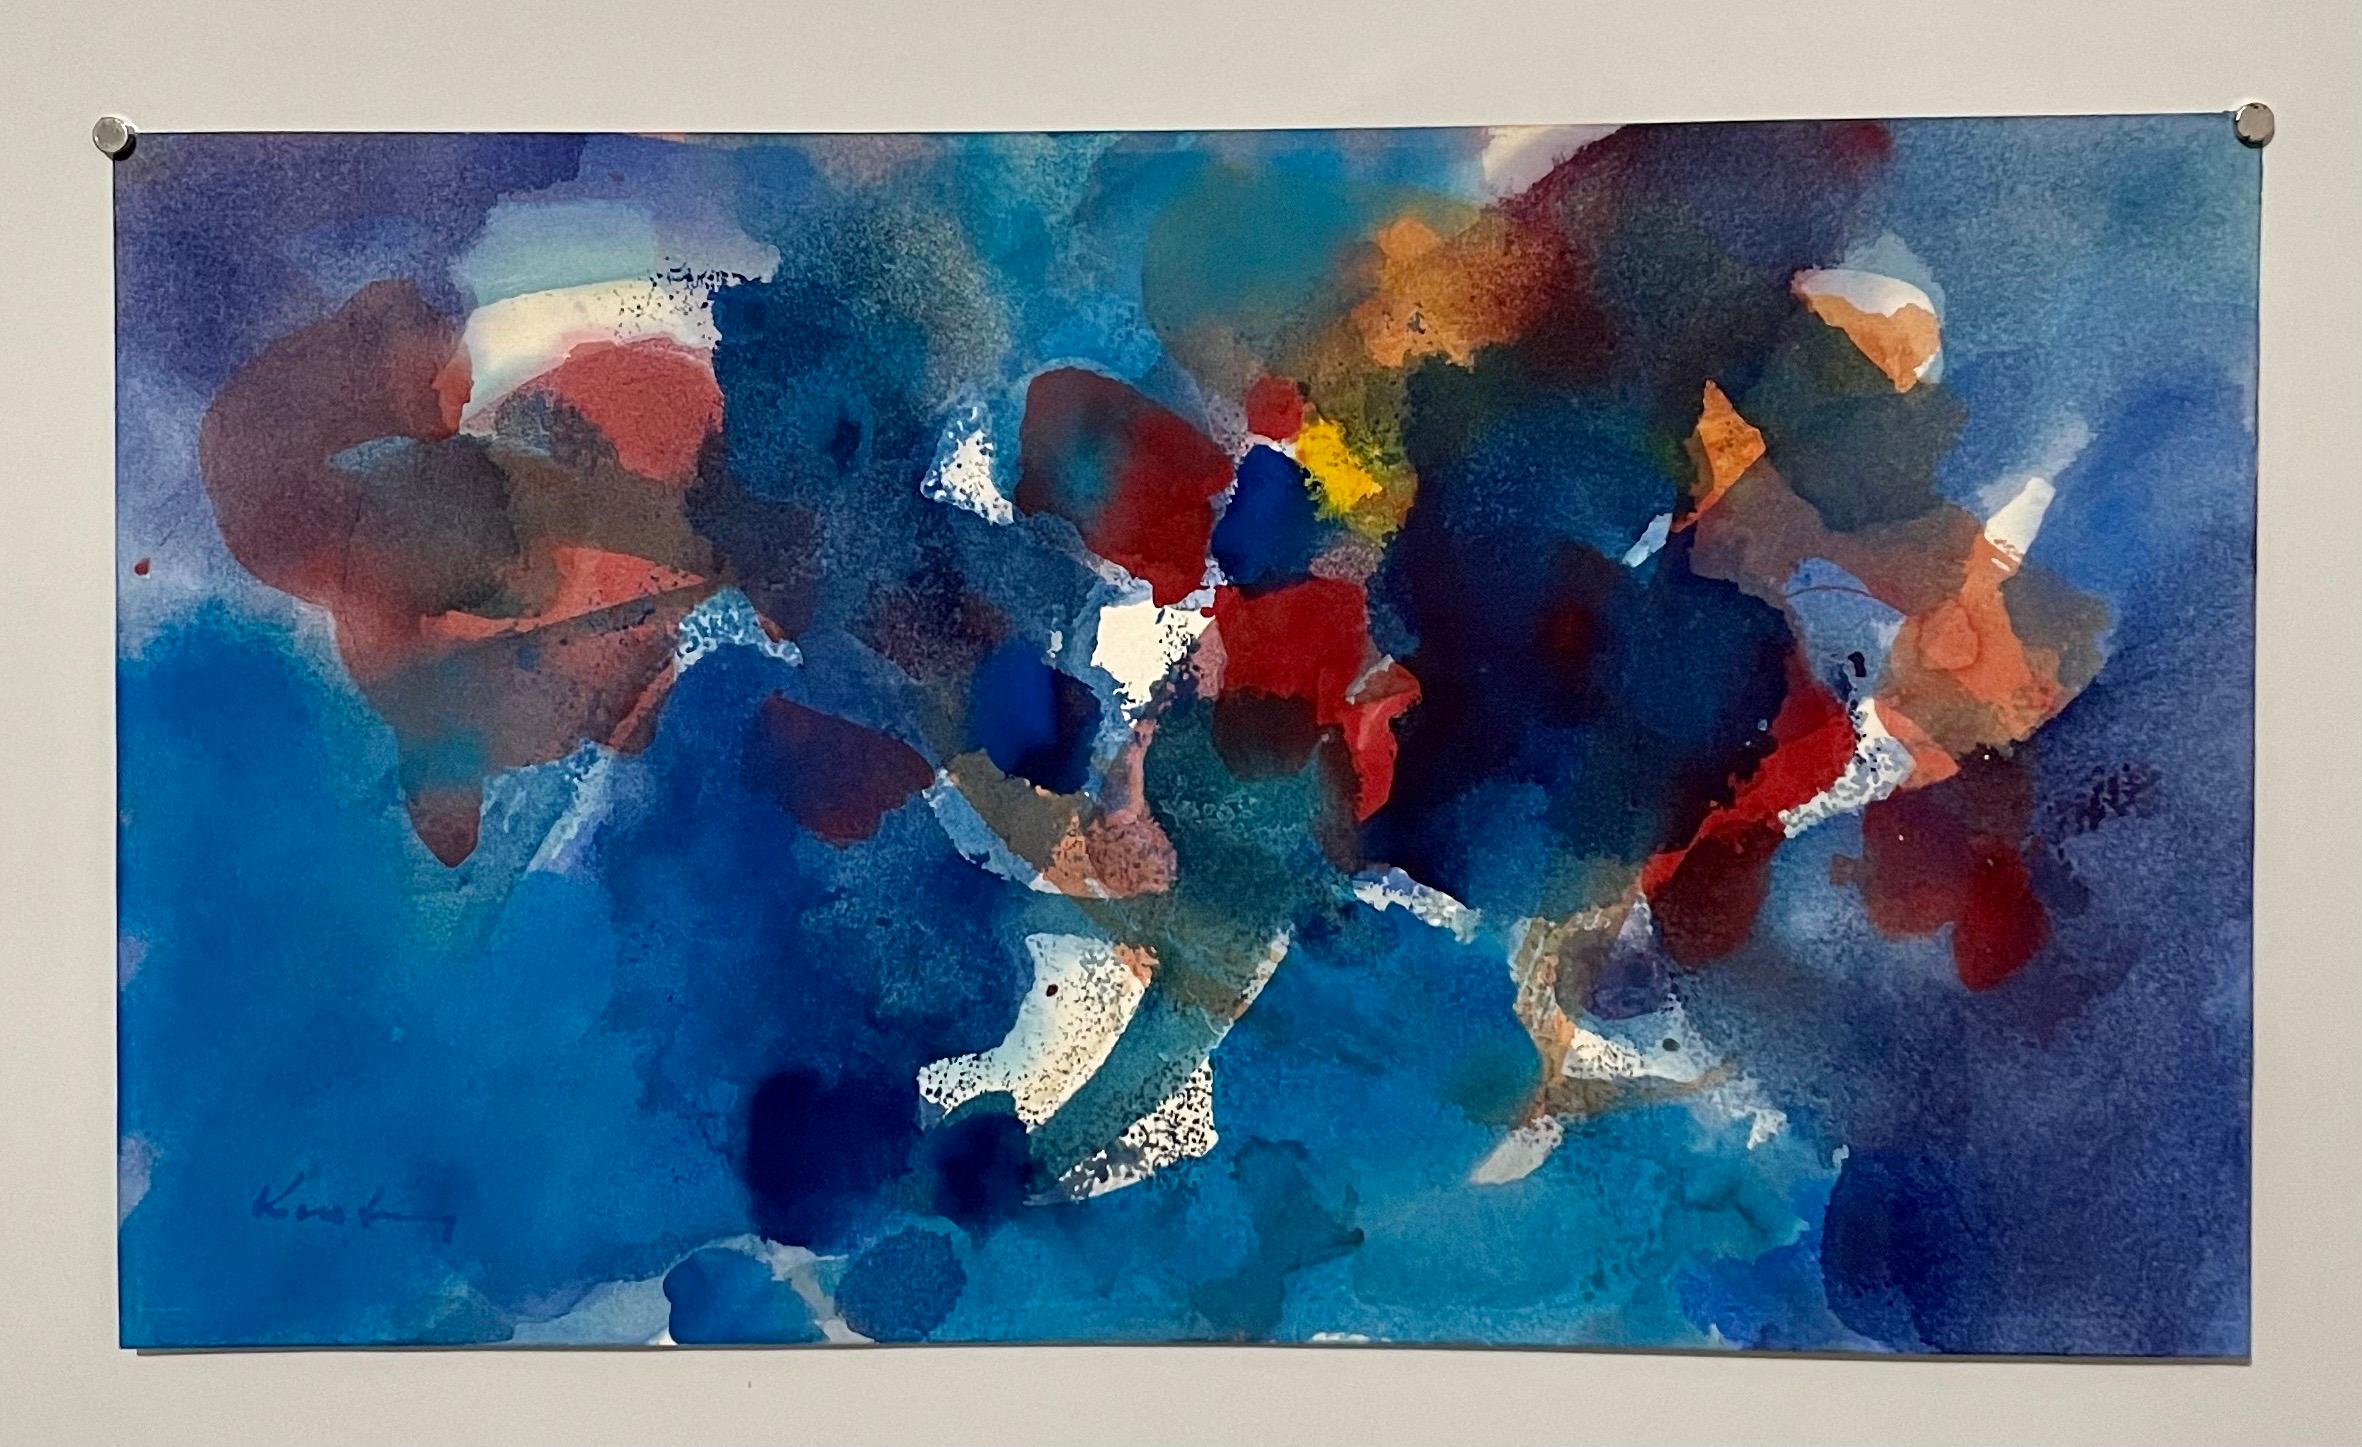 Abstract watercolor composition bearing the influence of the earlier color-block compositions of Paul Klee.

Pawel August Kontny, (Polish-German-American artist) He was born in Laurahuette, Poland, in 1923, the son of a wealthy pastry shop owner. In